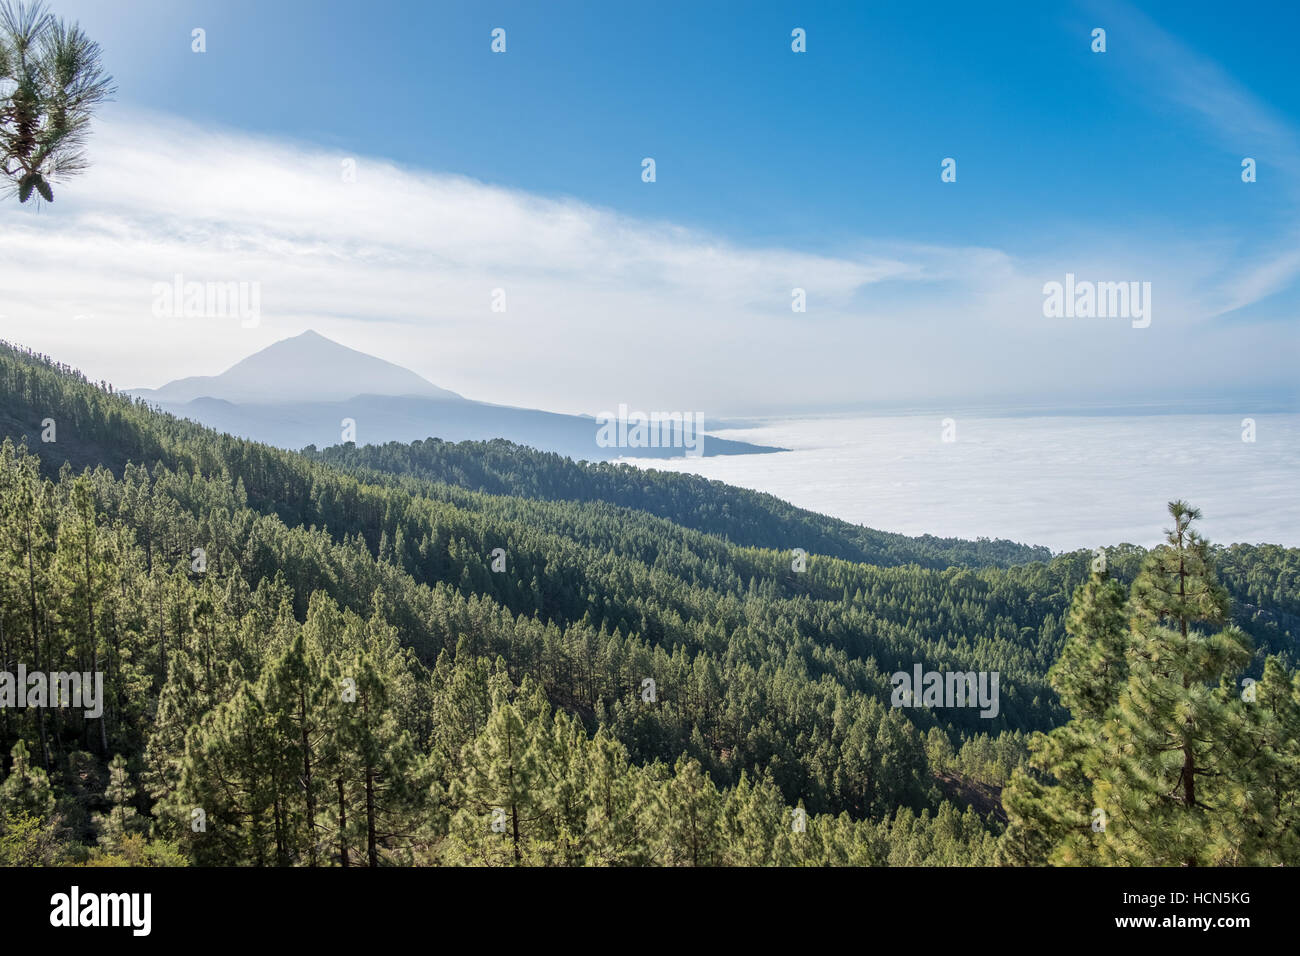 Peak of the mountain and sea of clouds, Tenerife Stock Photo